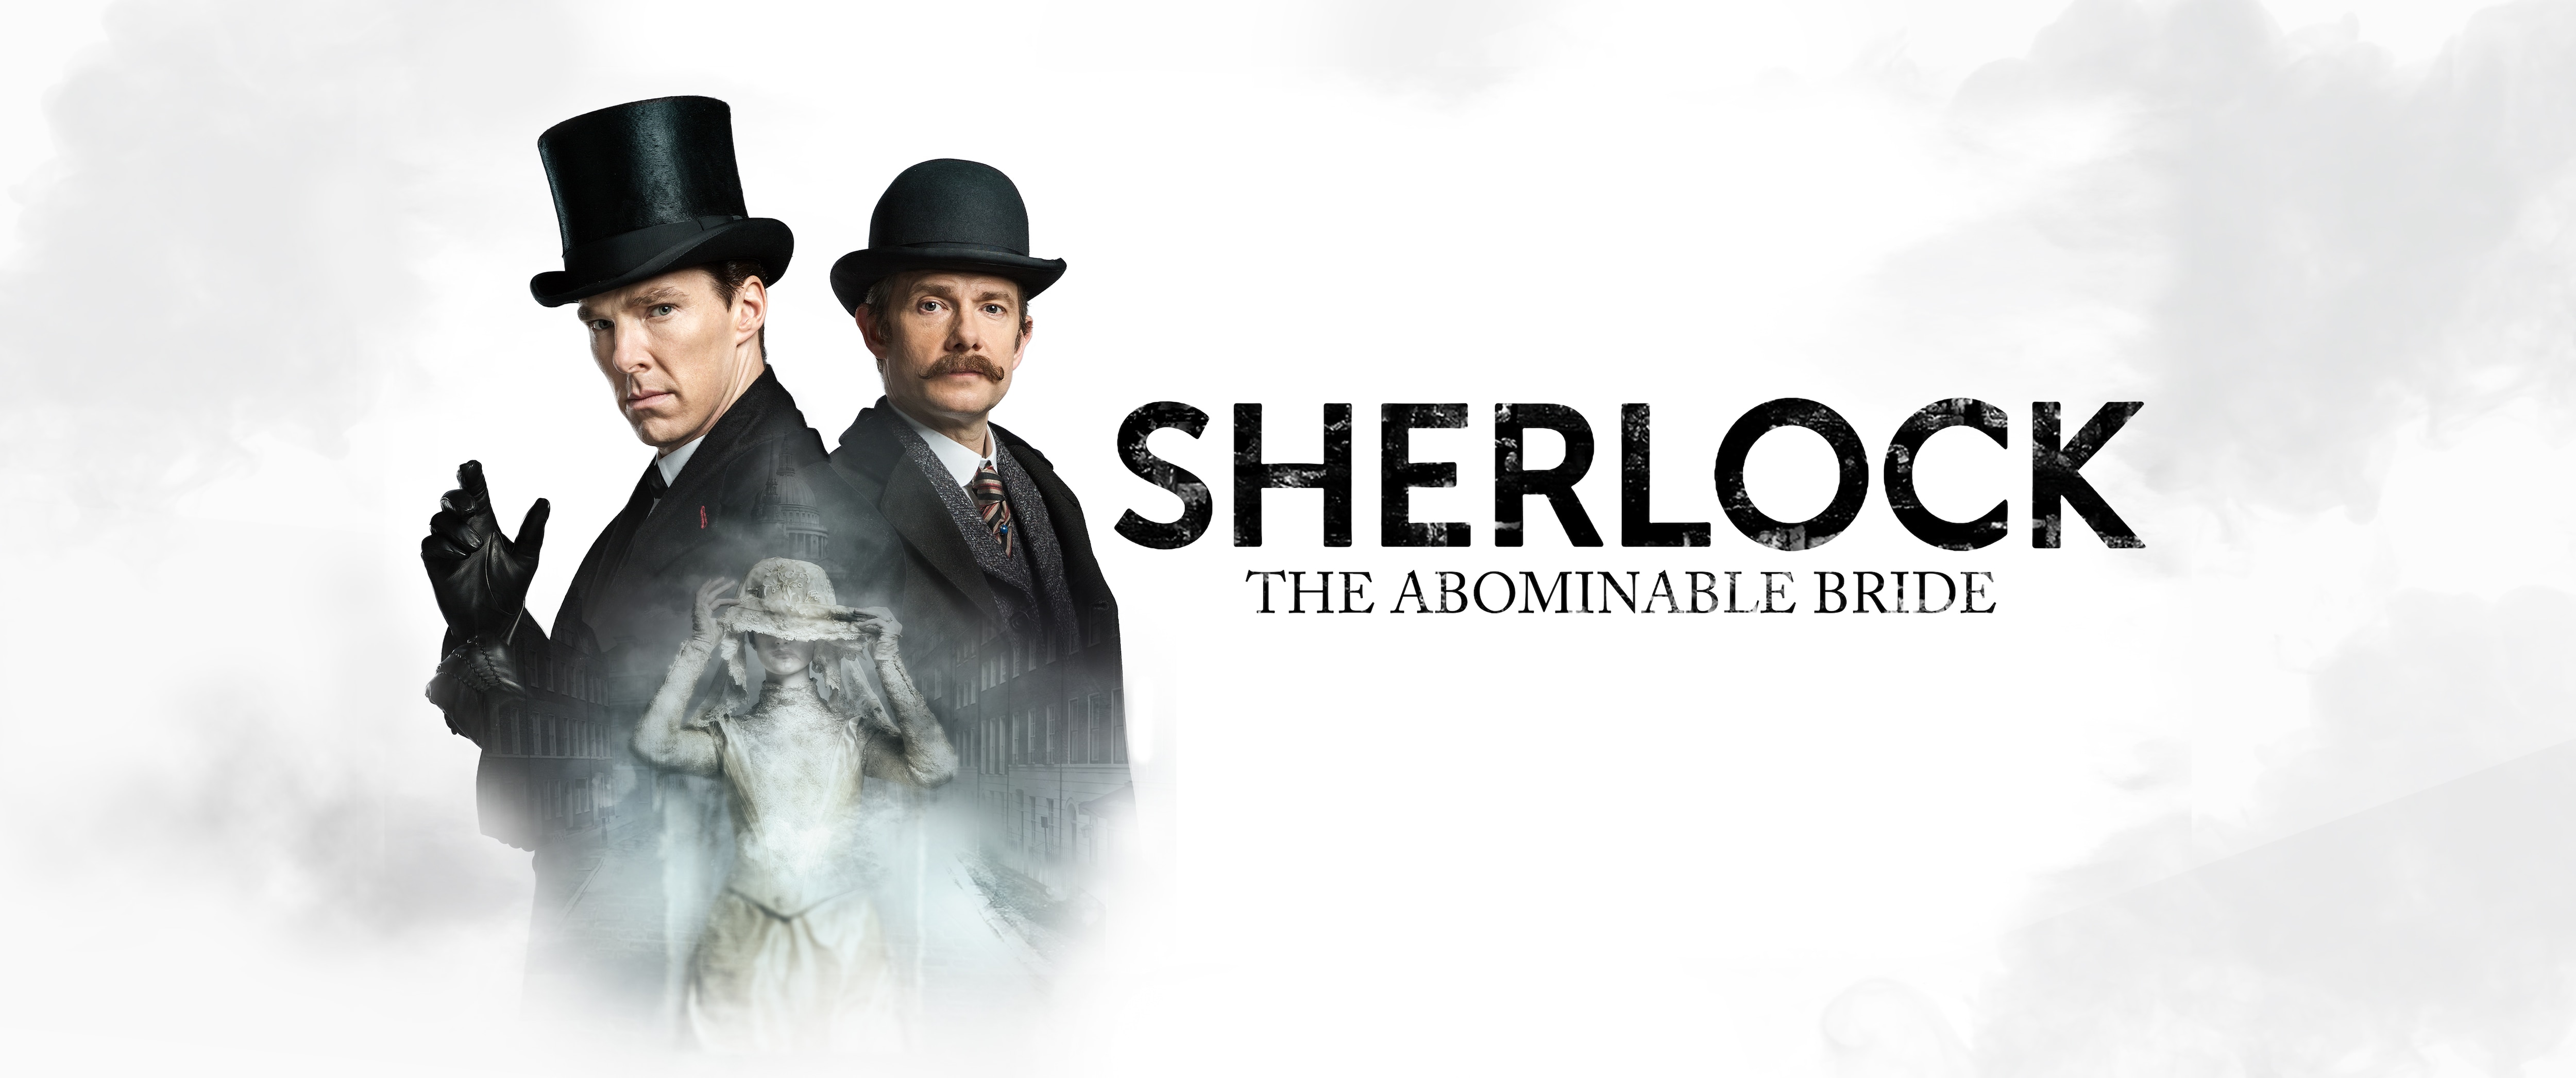 watch sherlock the abominable bride online with subtitles